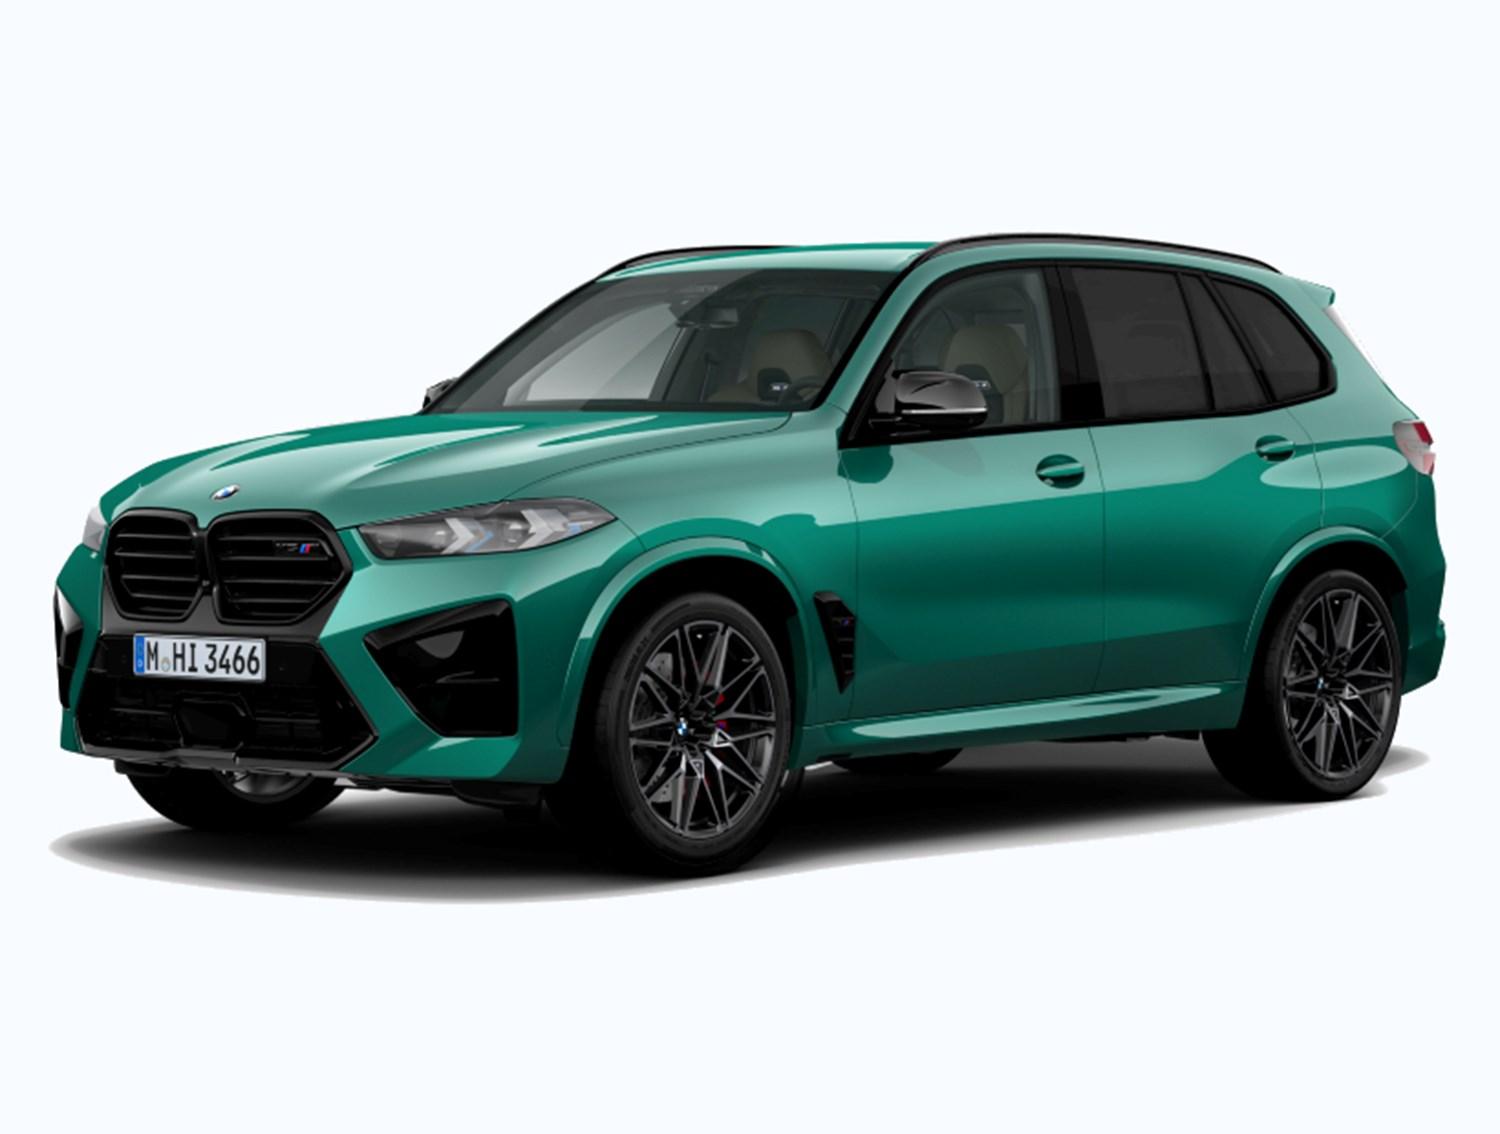 BMW X5 M Competition, in Isle of Man Green